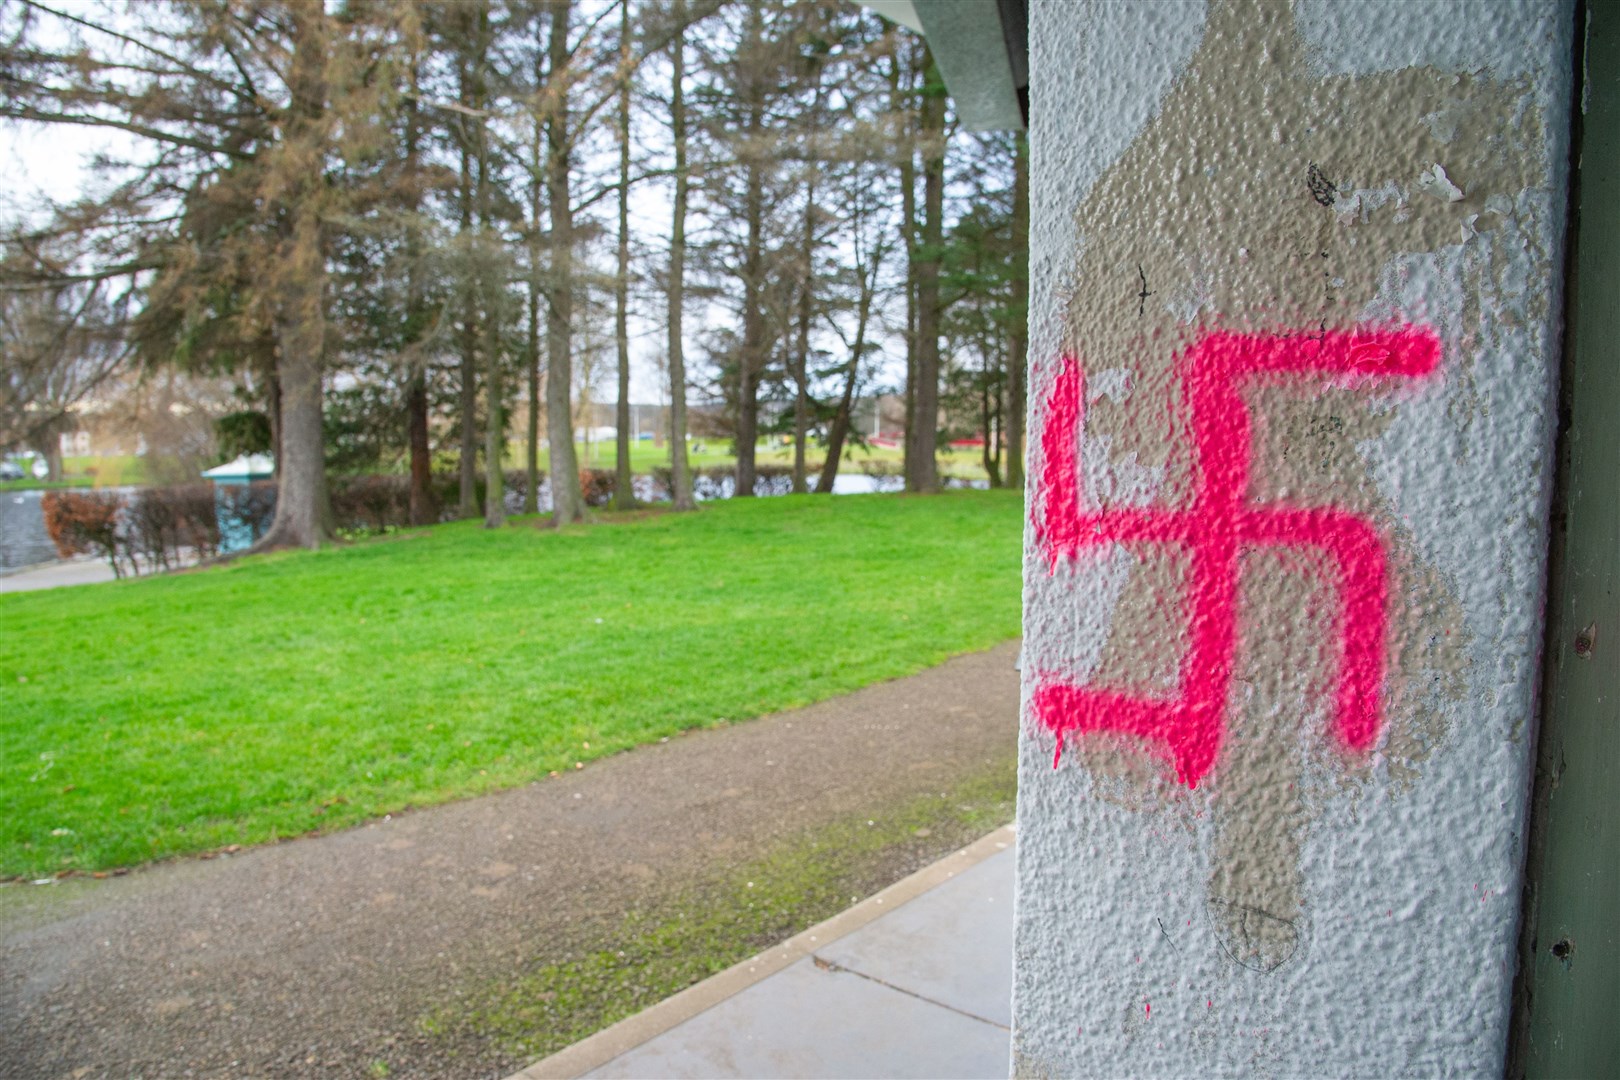 Graffiti, including a swastika, has been sprayed on the Cooper Park Pavillion - which had just been re-painted in the 2019 summertime by school pupils. Picture: Daniel Forsyth